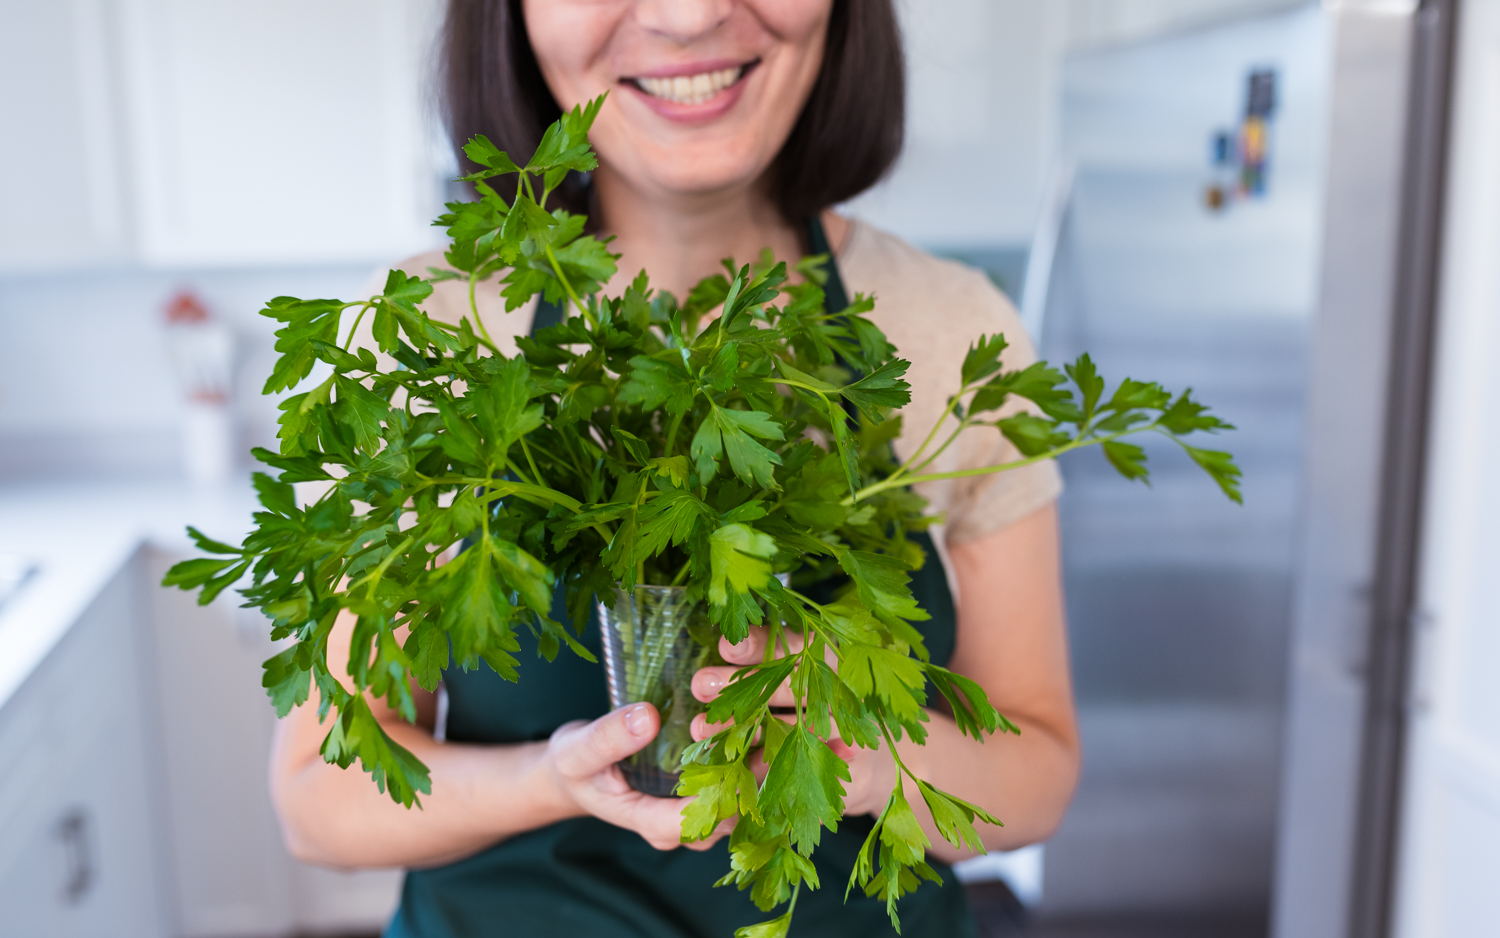 Woman smilling holding parsley in hands, ideas touse your greens bfore they wilt, Health and Yum food blog